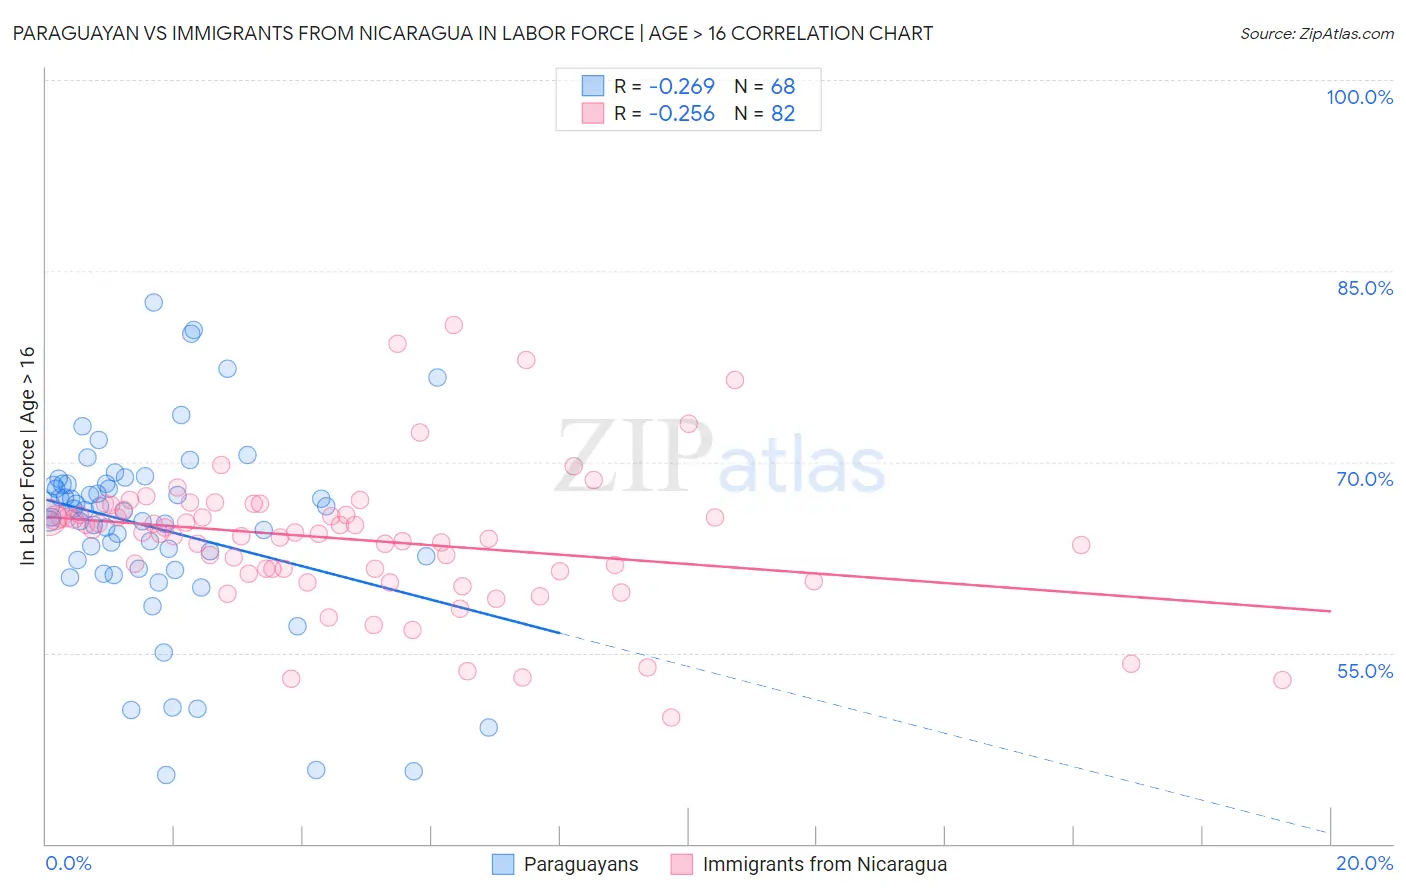 Paraguayan vs Immigrants from Nicaragua In Labor Force | Age > 16